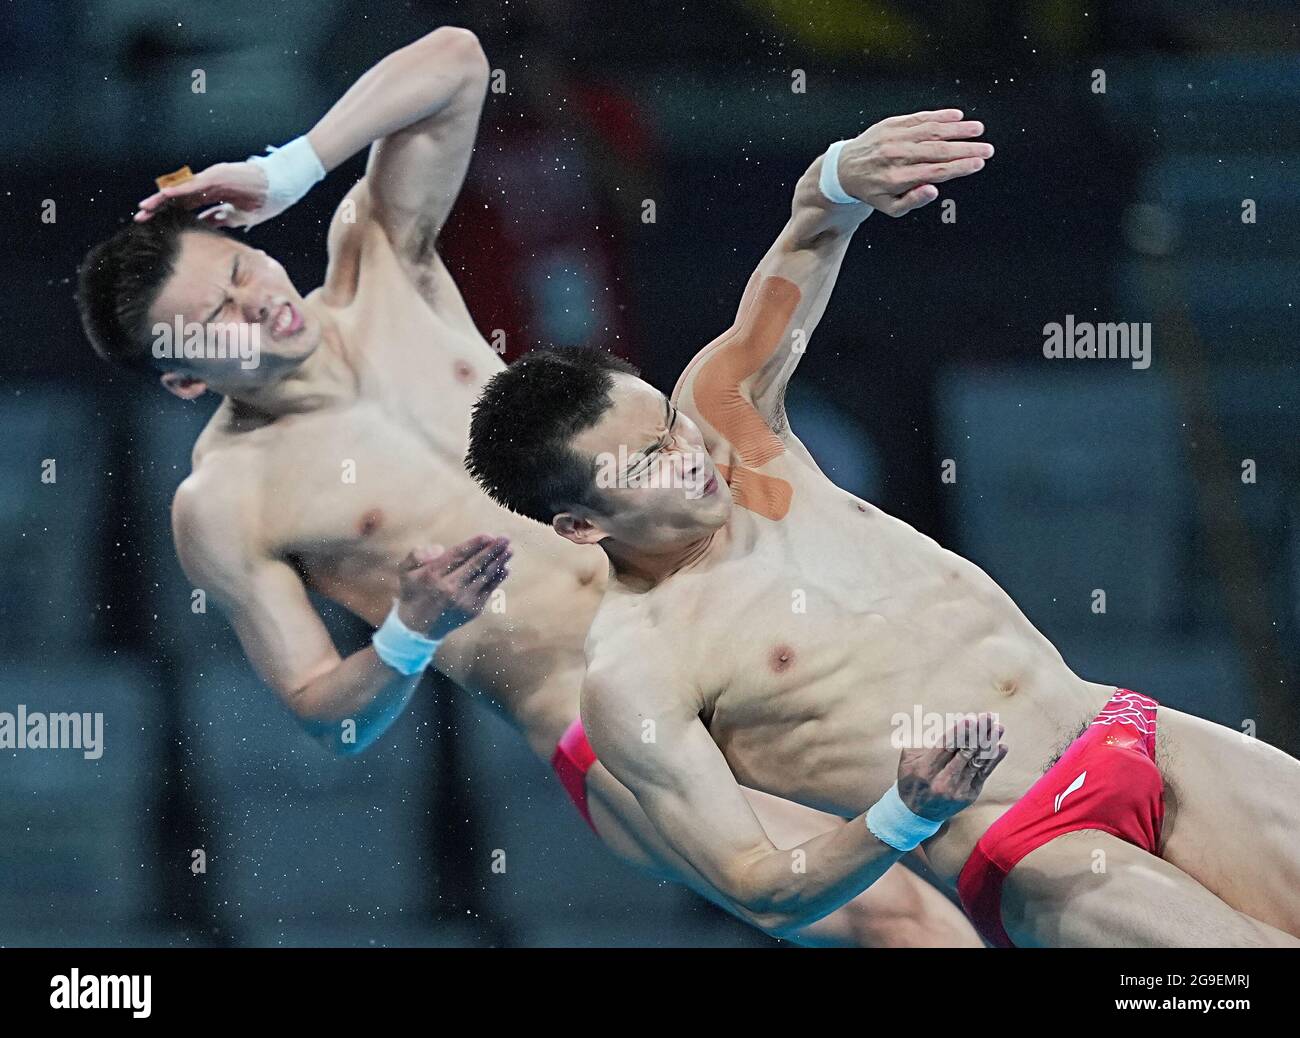 Tokio, Japan. 26th July, 2021. Swimming: Olympics, preliminaries, water diving - synchronised 10m, men at Tokyo Aquatics Centre. China's Cao Yuan and Chen Aisen in action. Credit: Michael Kappeler/dpa/Alamy Live News Stock Photo